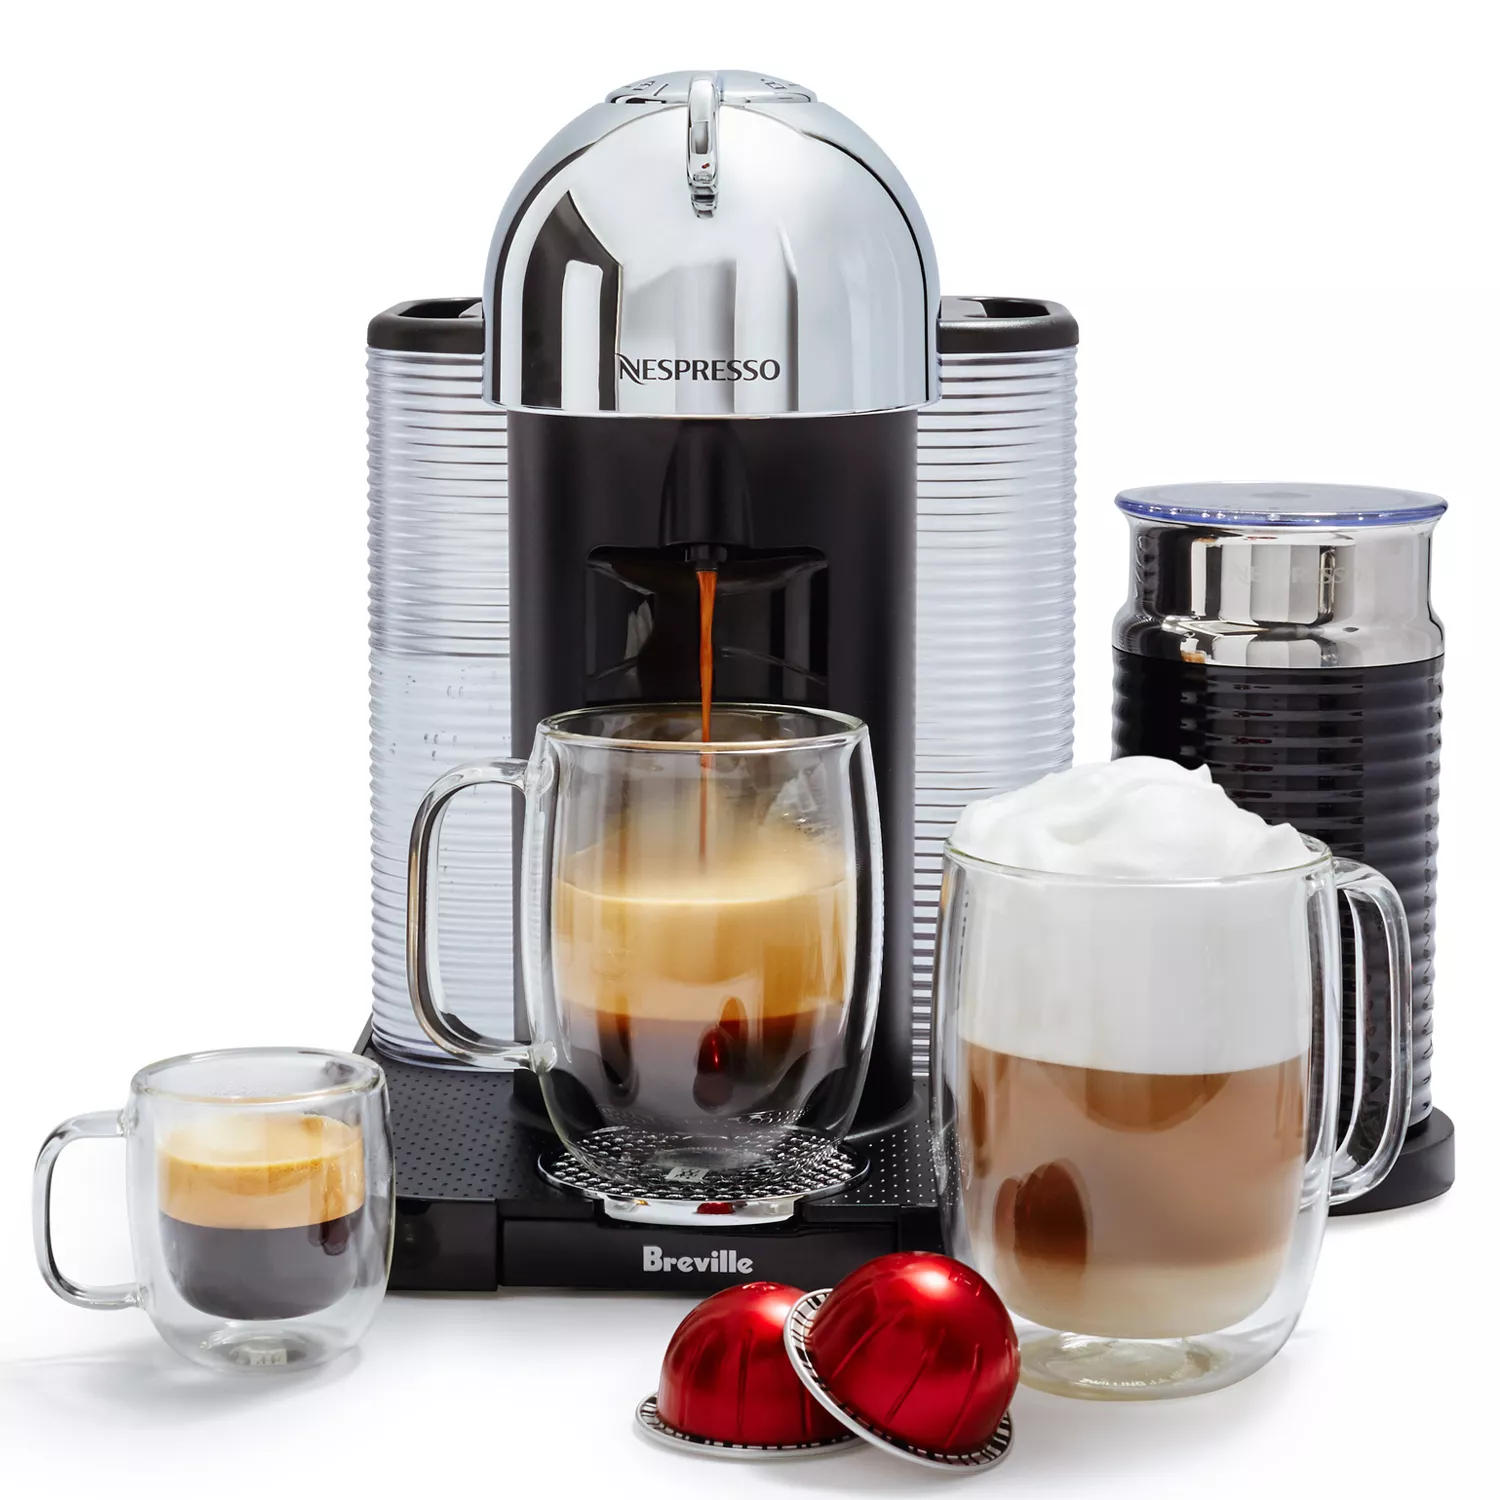 Nespresso VertuoLine Review: The Best In Its Category